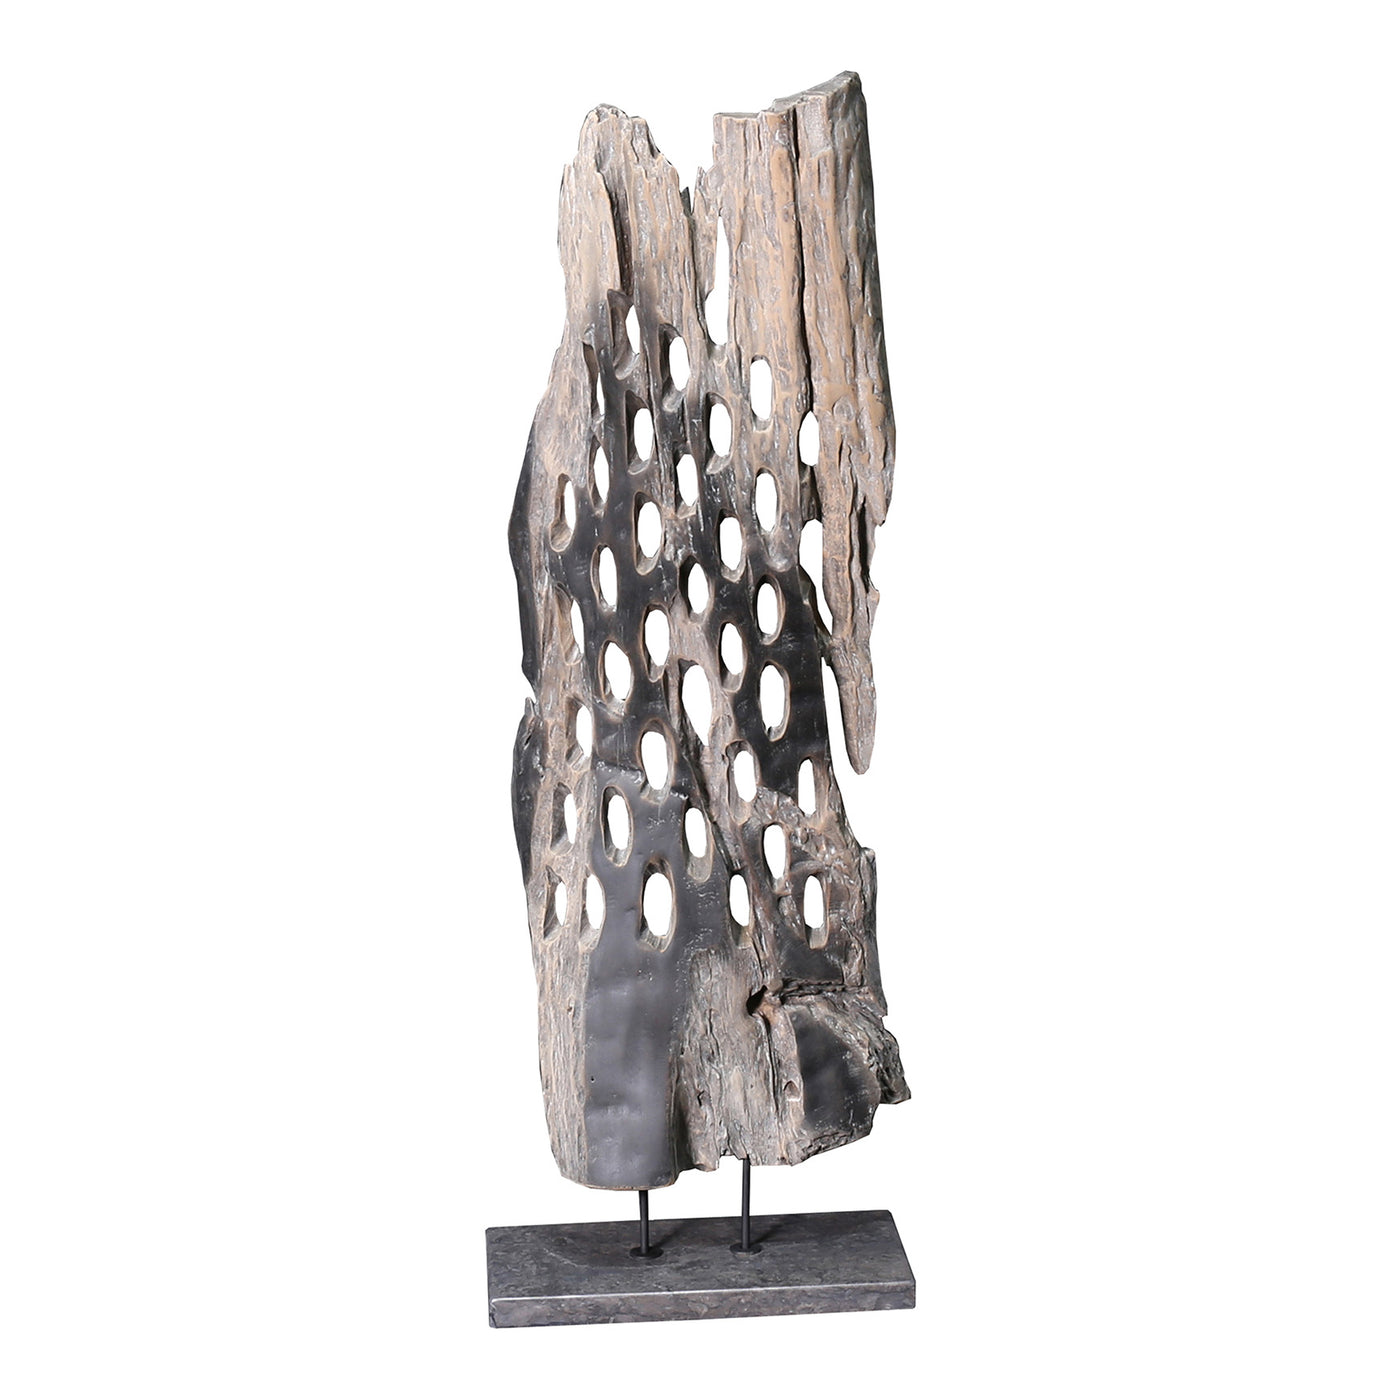 This weather-grey teak sculpture will add a natural element to a room - it's tall height will make a dramatic centerpiece ...